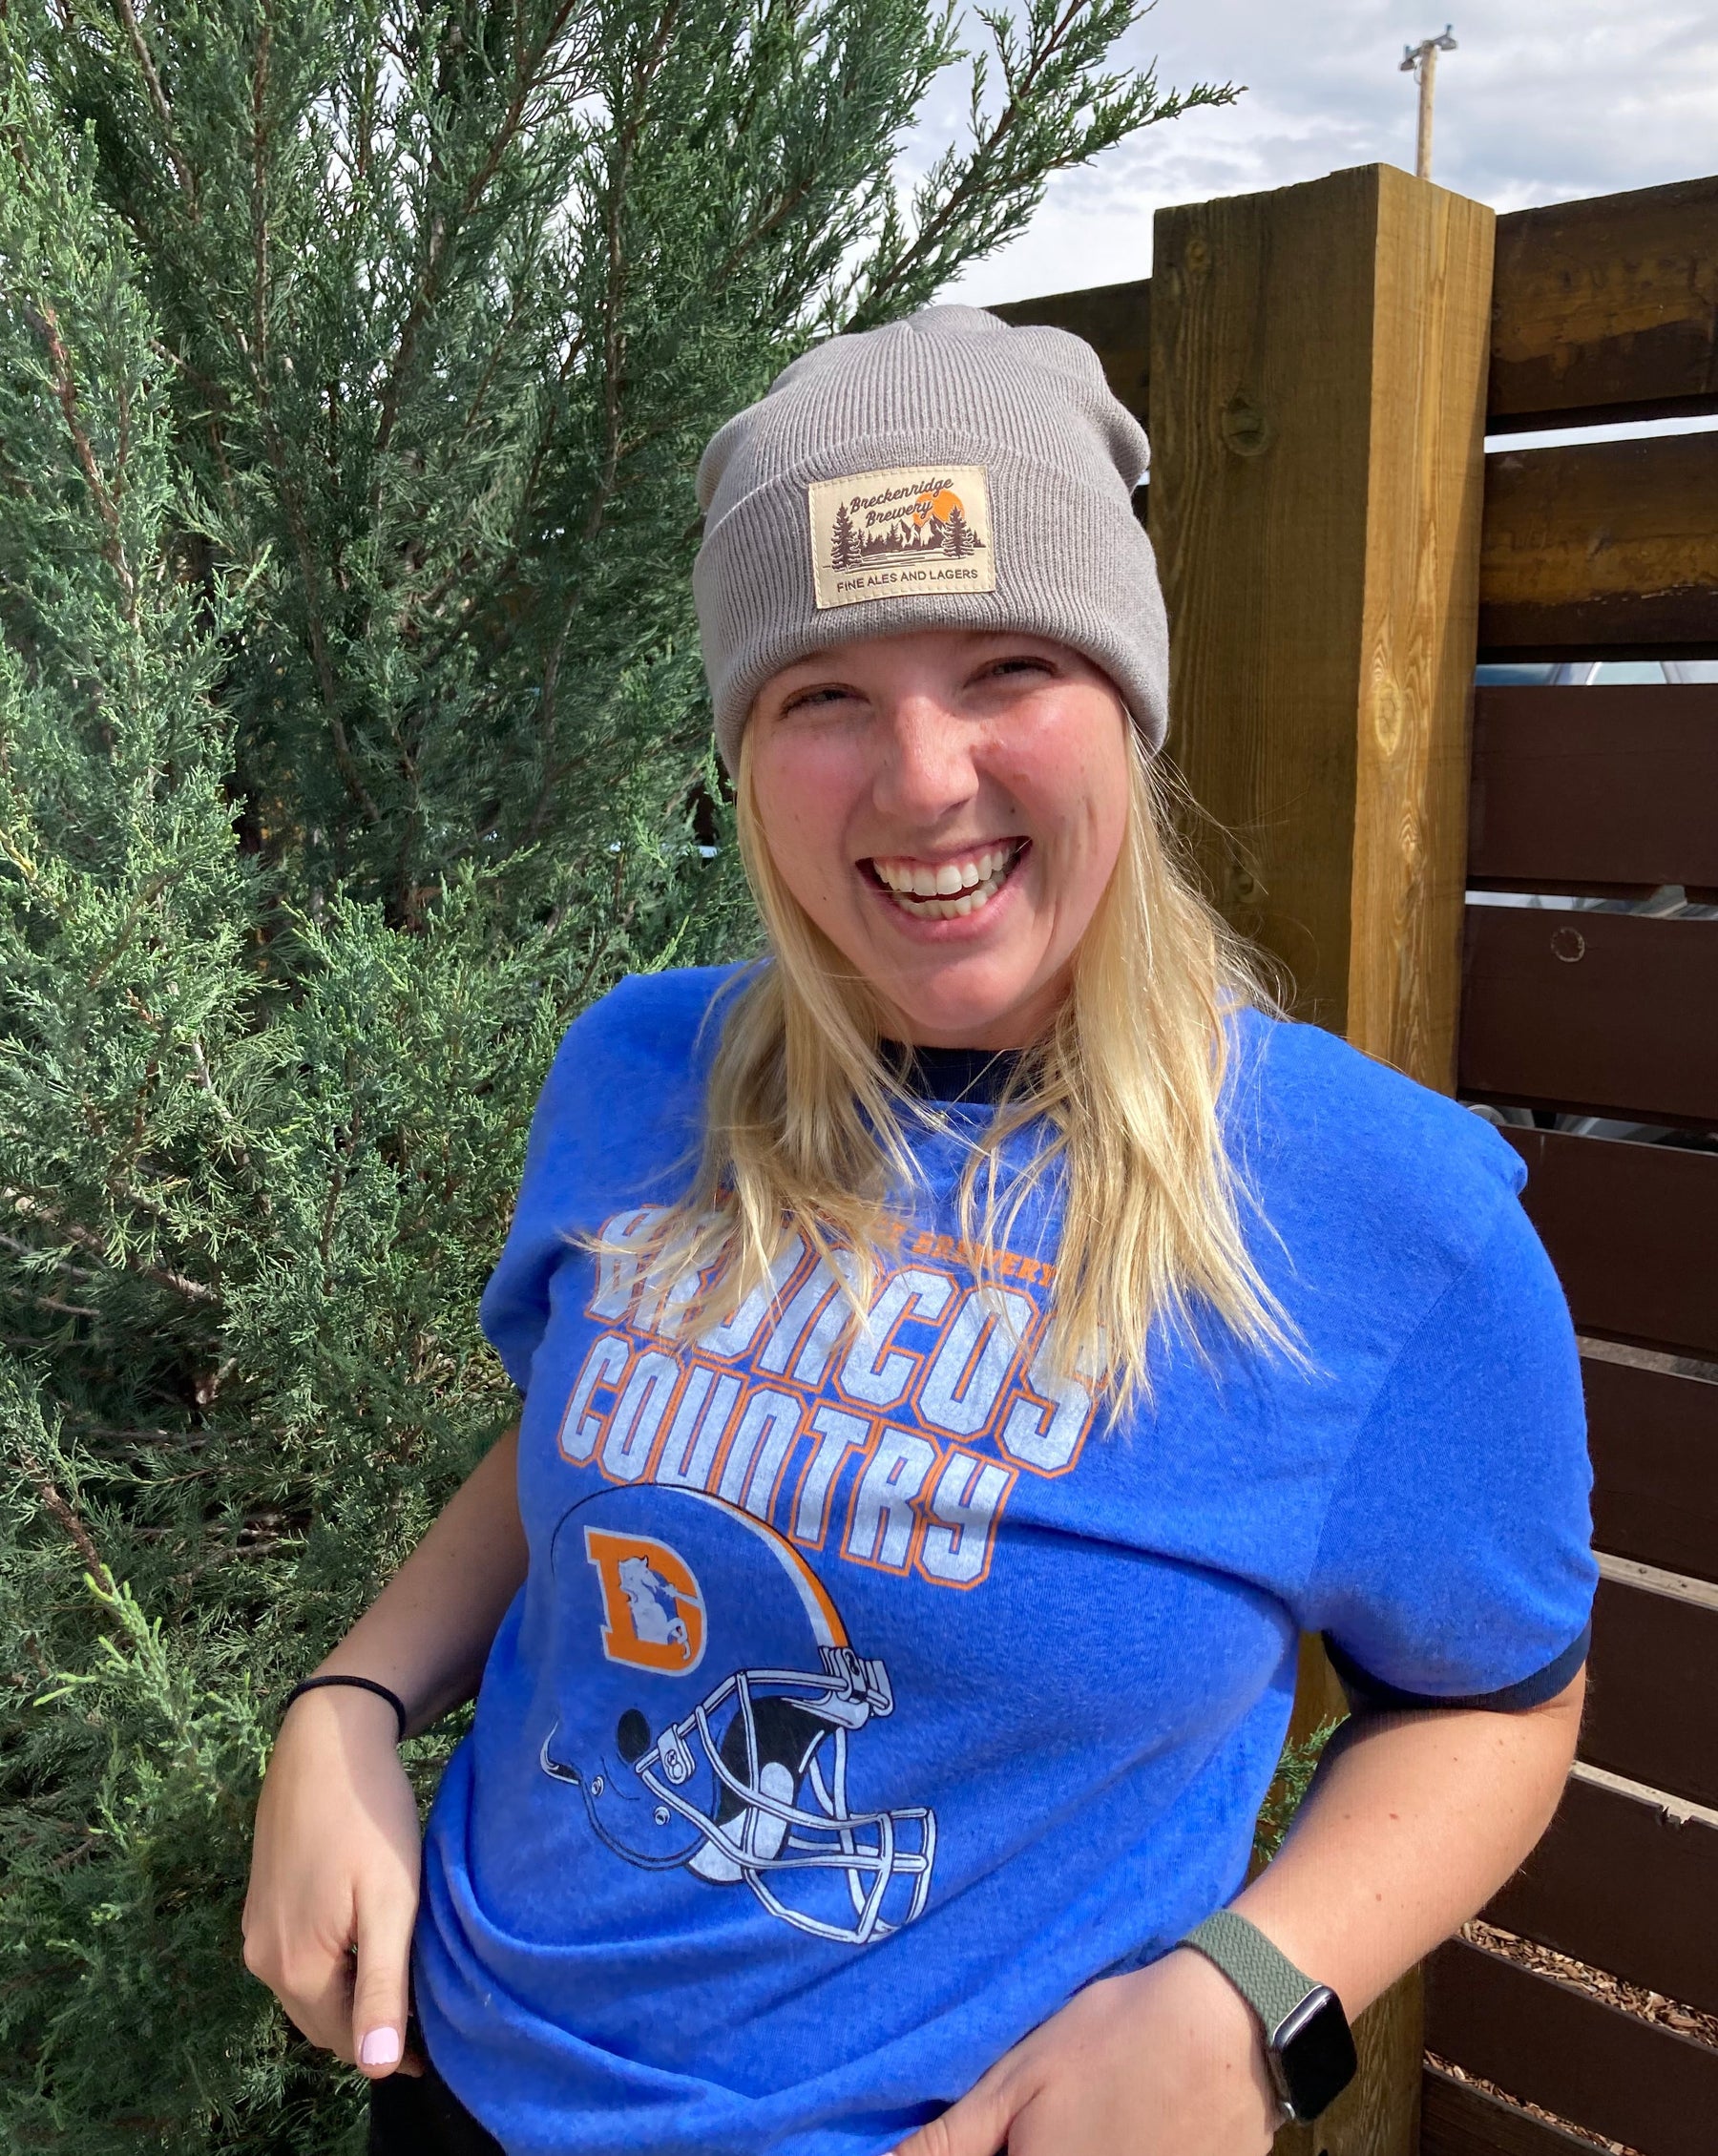 Broncos Country Tee